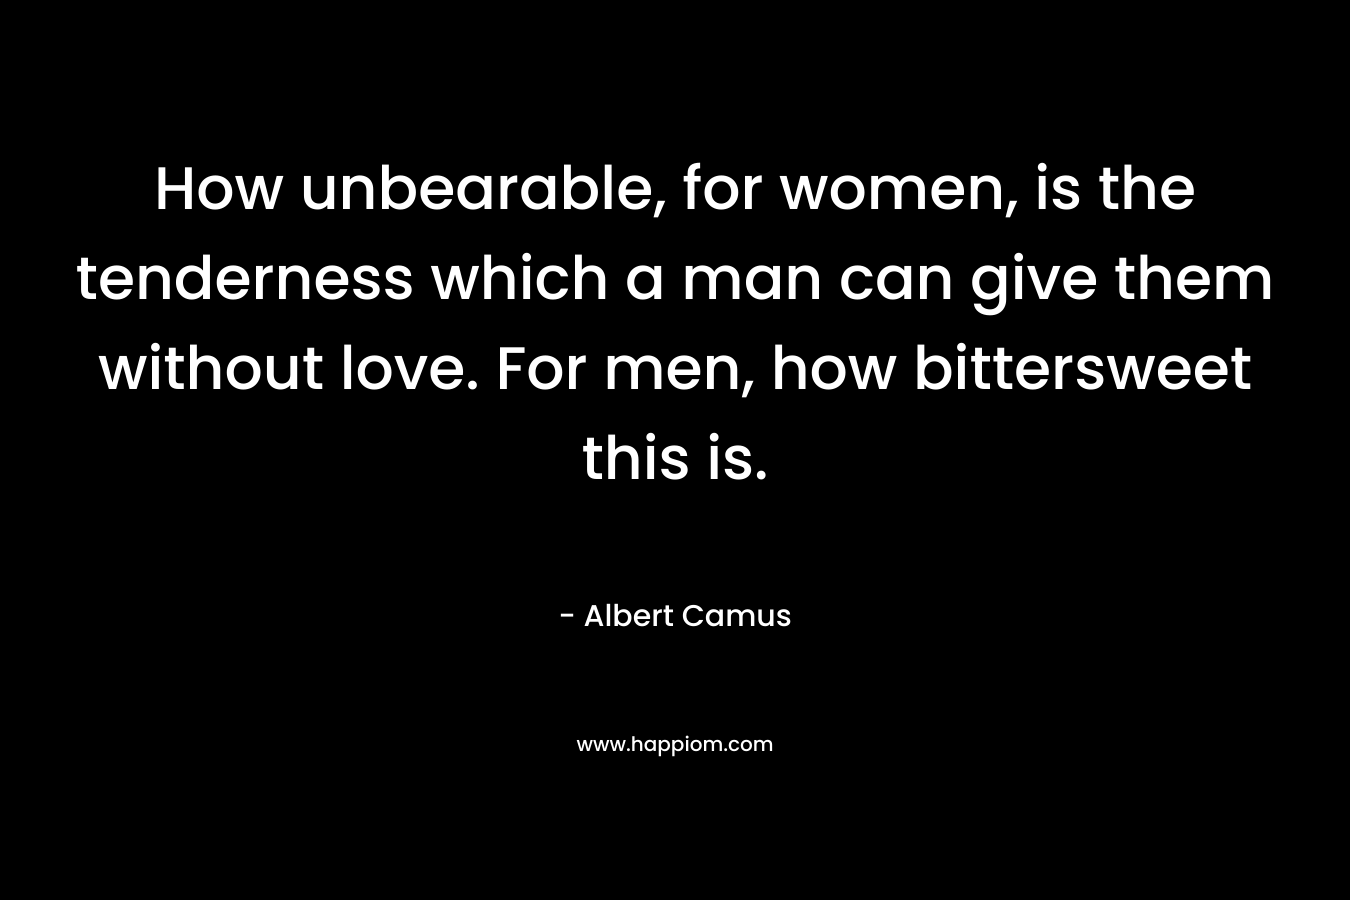 How unbearable, for women, is the tenderness which a man can give them without love. For men, how bittersweet this is.